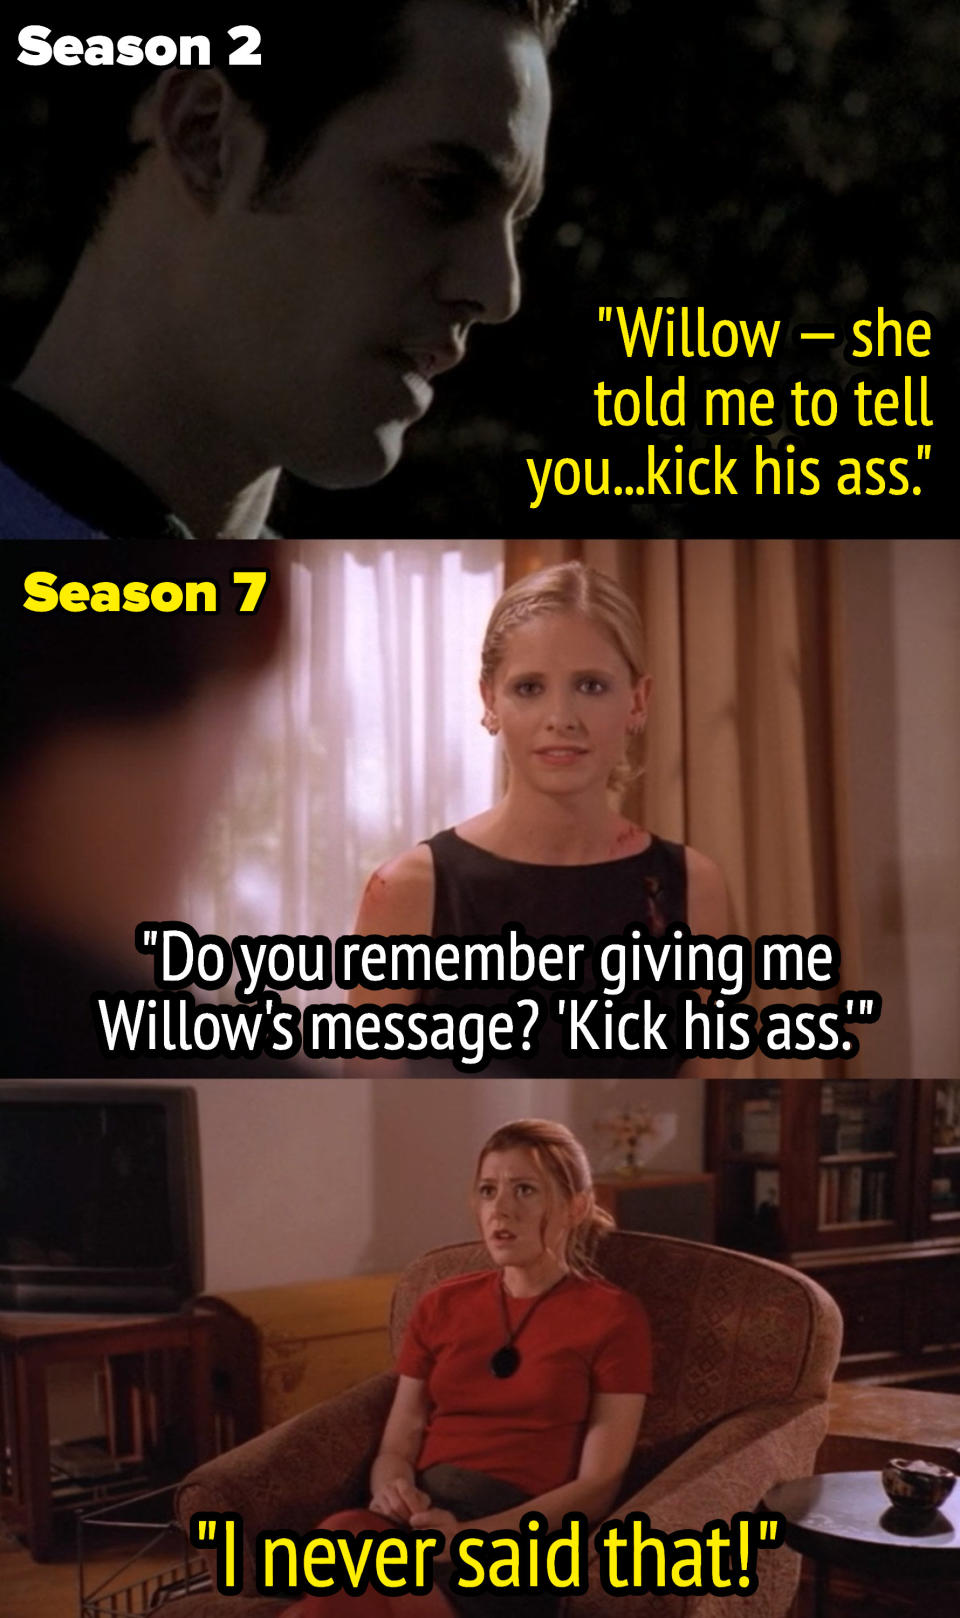 xander telling buffy willow said for her to kick angel's ass in season 2 then buffy asking him if he remembers giving him that message in season 7 and willow saying she never said that